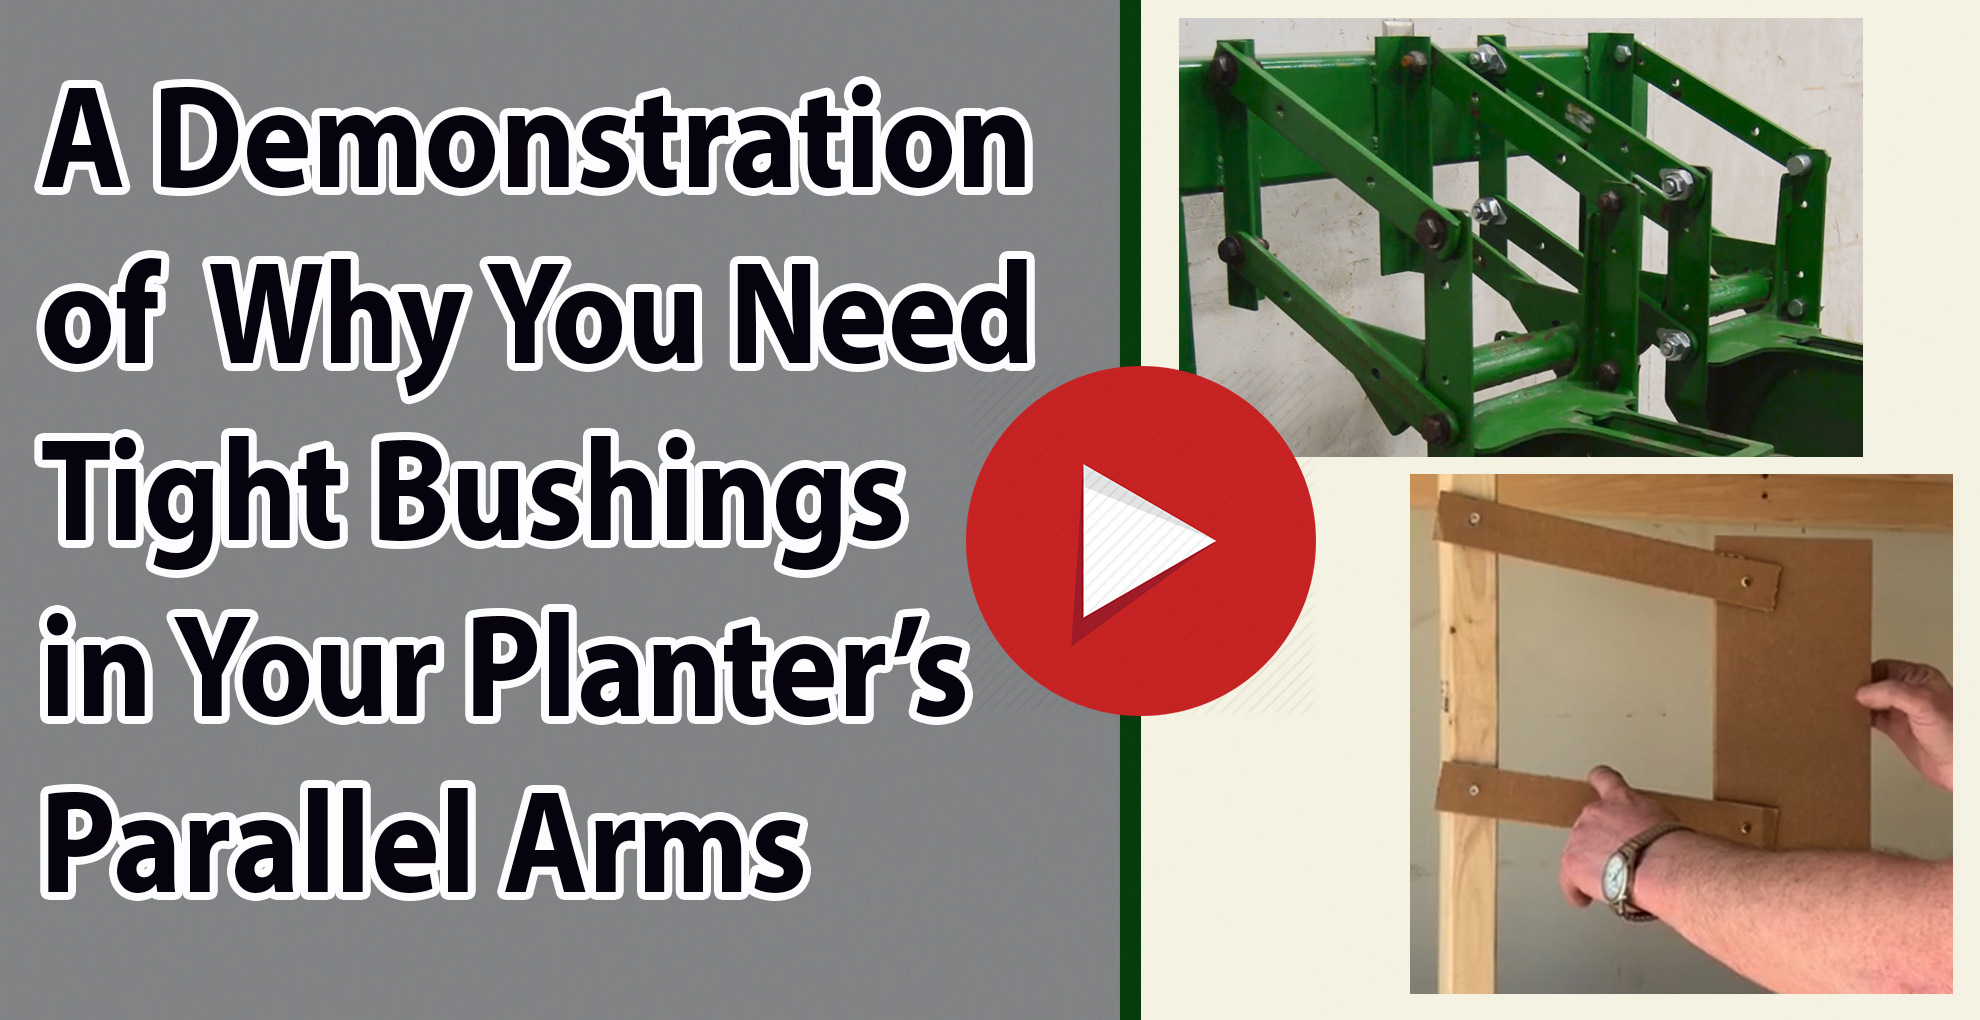 PPS Demonstration of why you need tight bushings in planters parallel arms